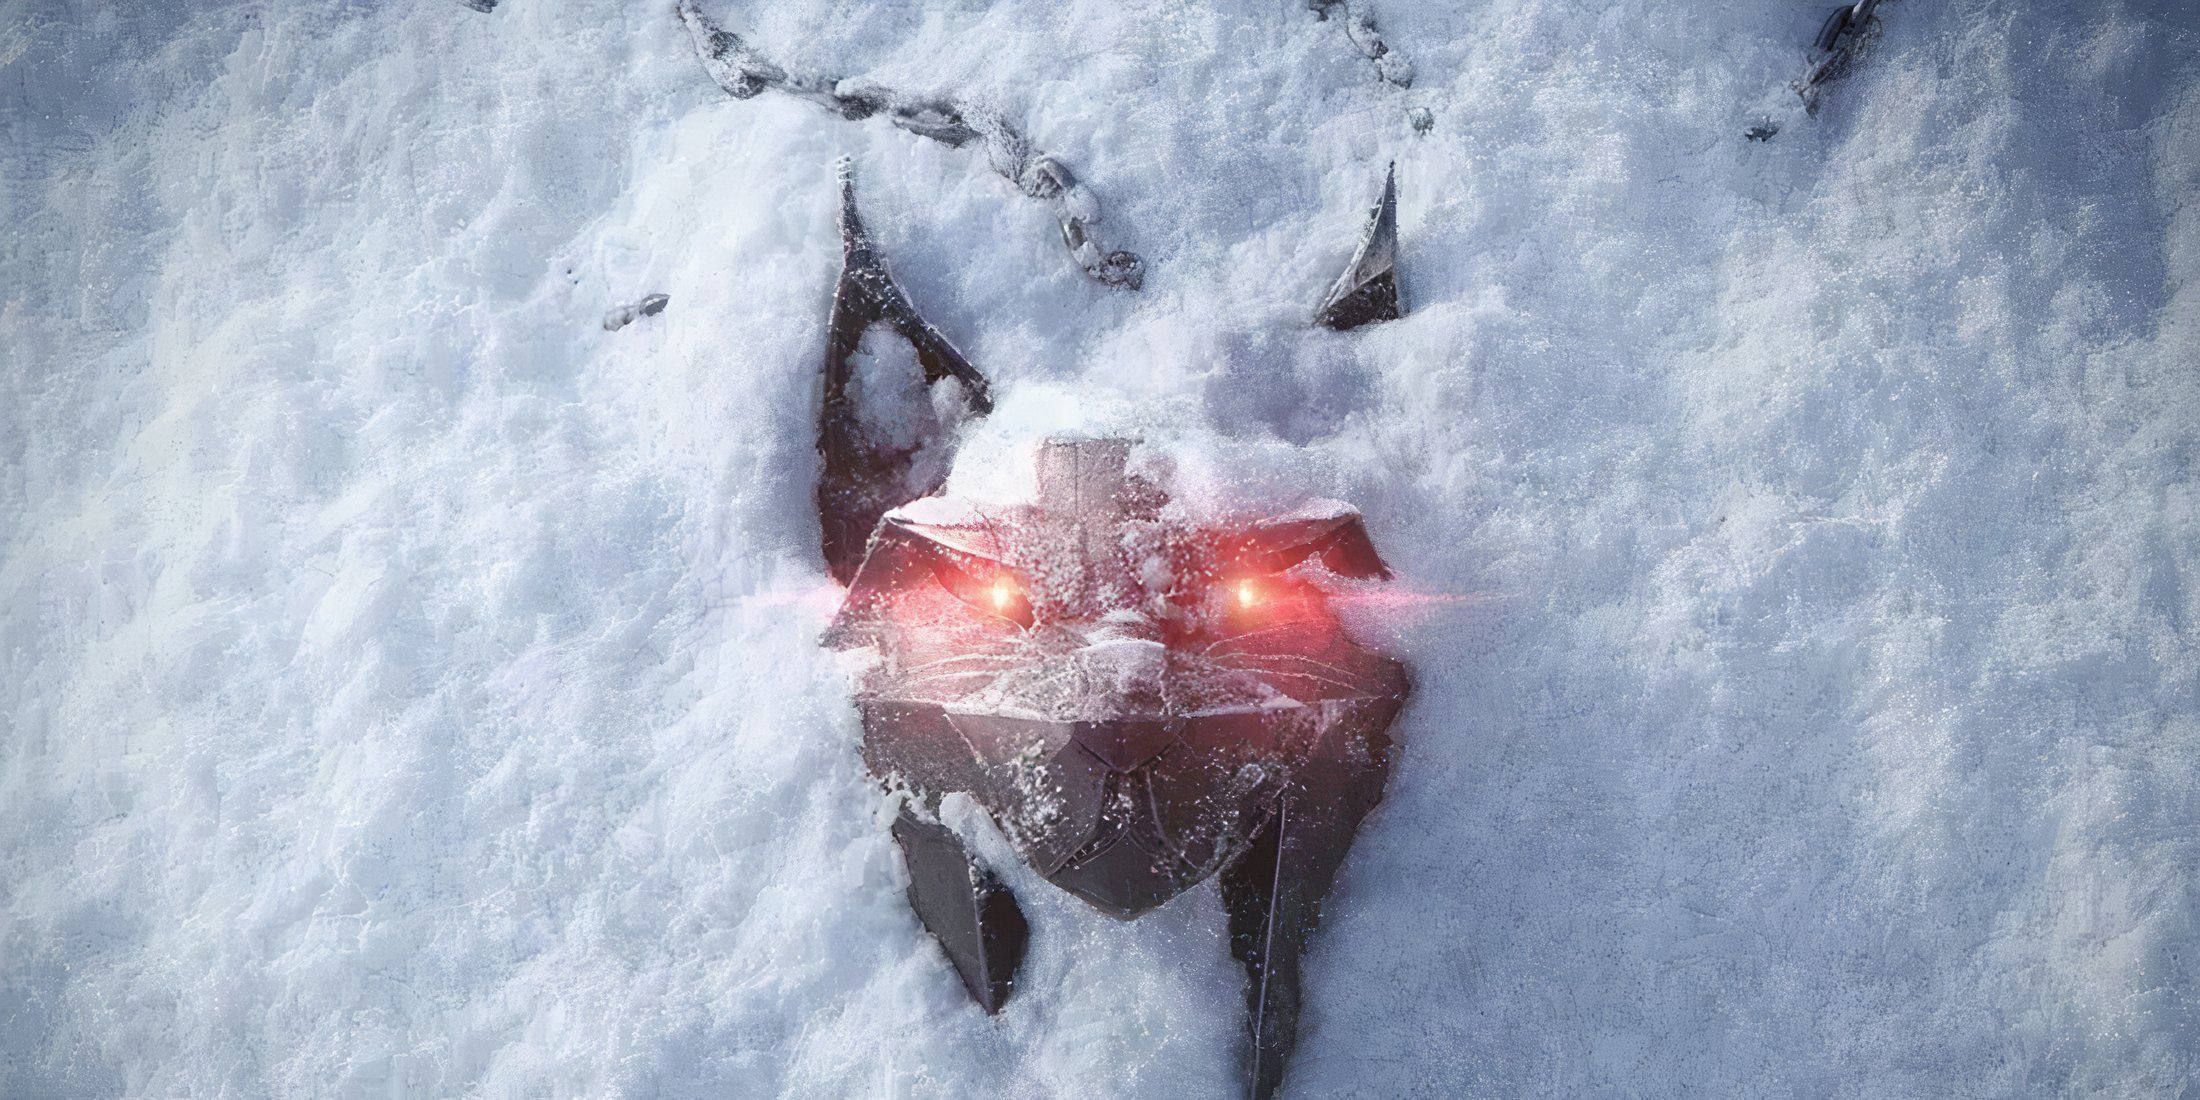 Lynx From the Witcher 4 Teaser Image